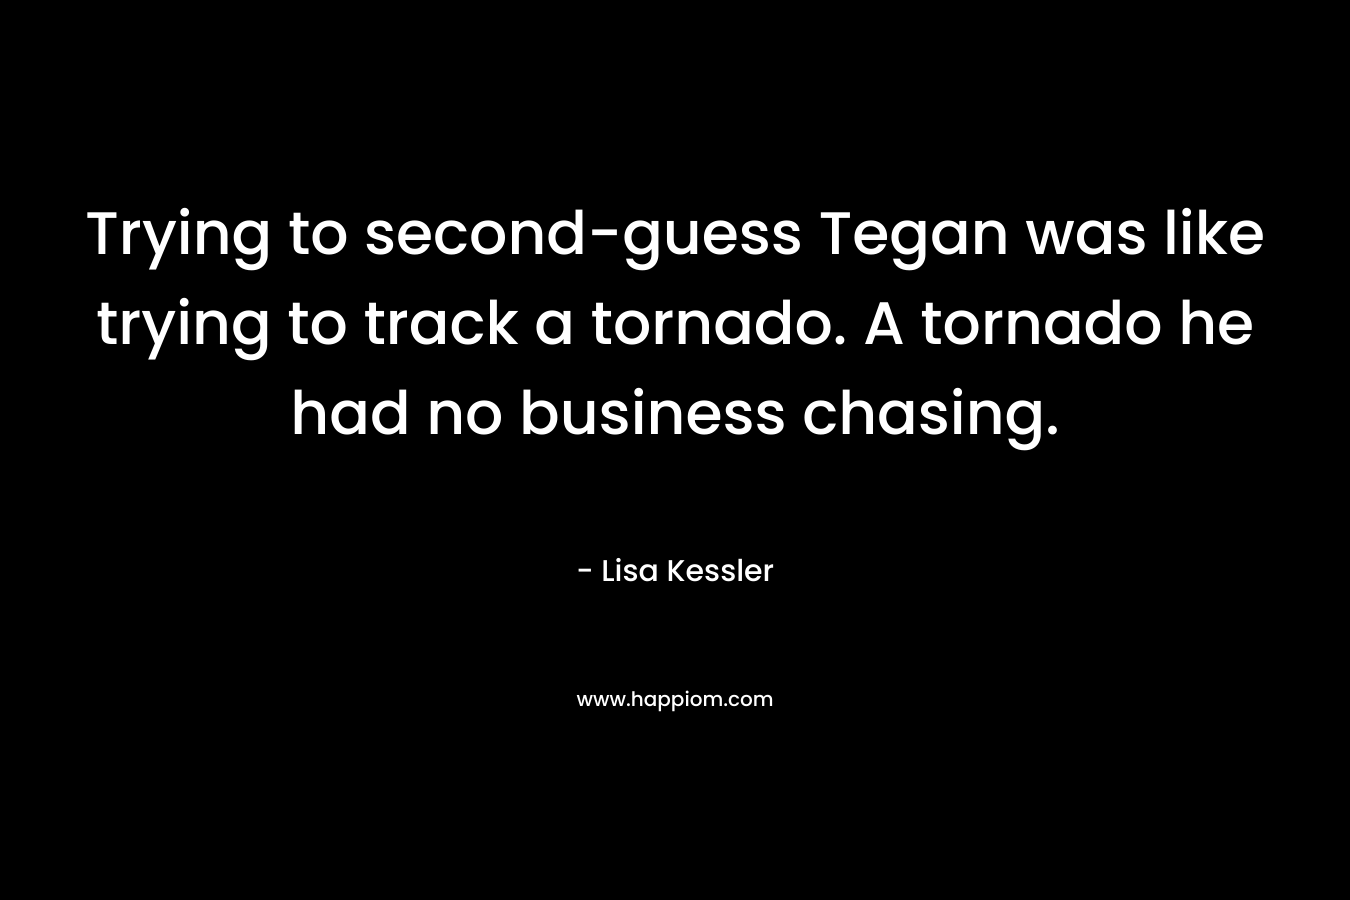 Trying to second-guess Tegan was like trying to track a tornado. A tornado he had no business chasing. – Lisa Kessler